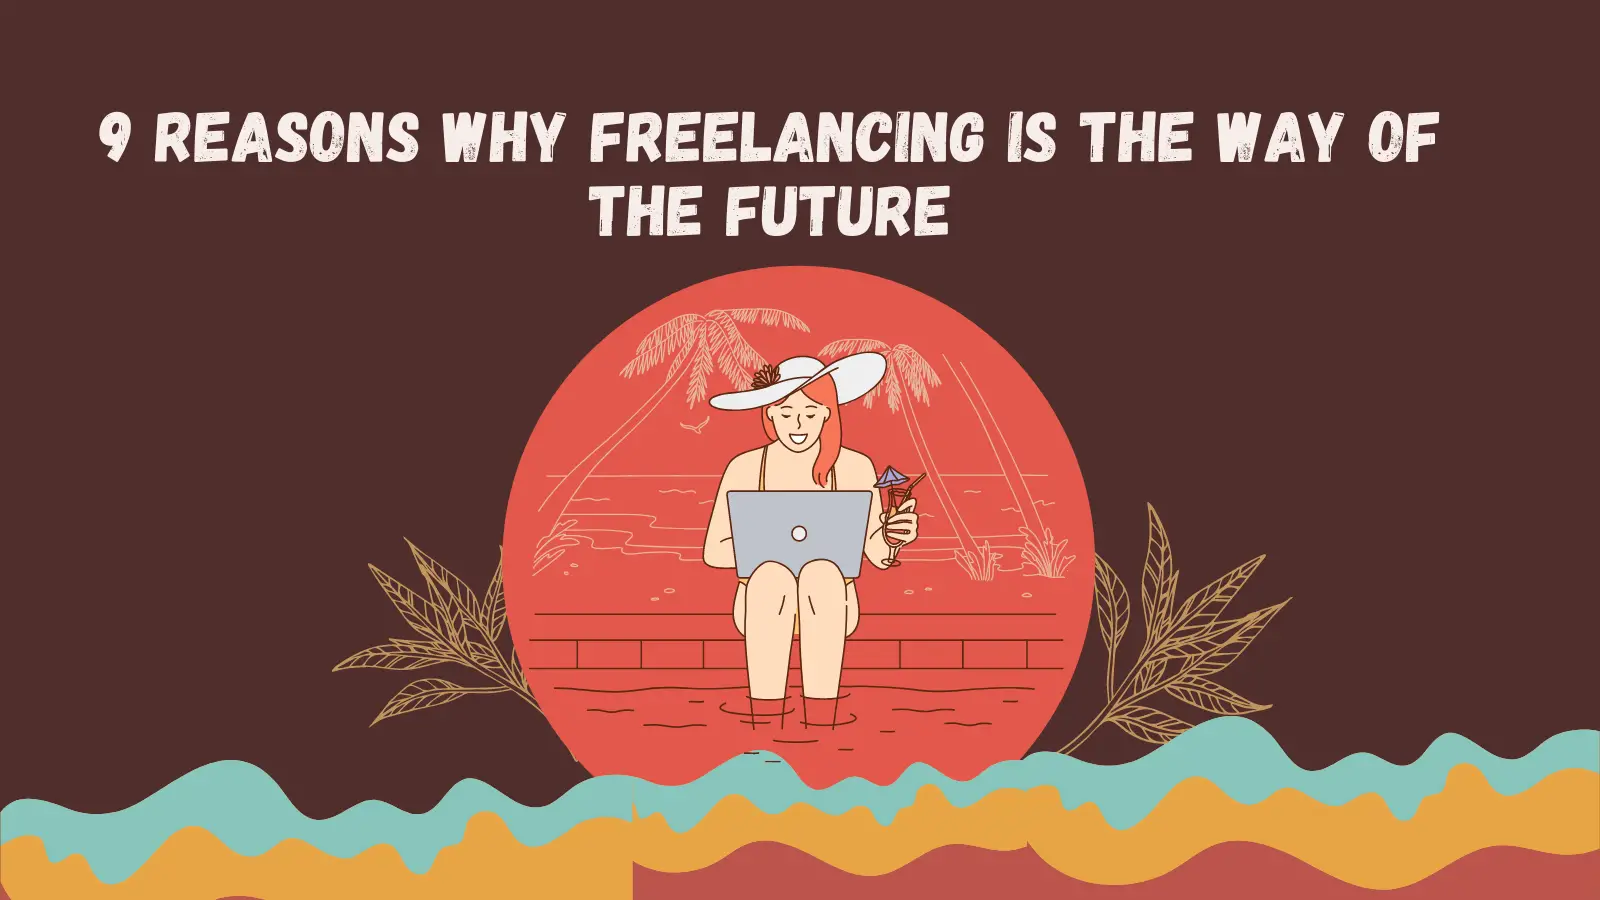 9 Reasons why Freelancing is the way of the future